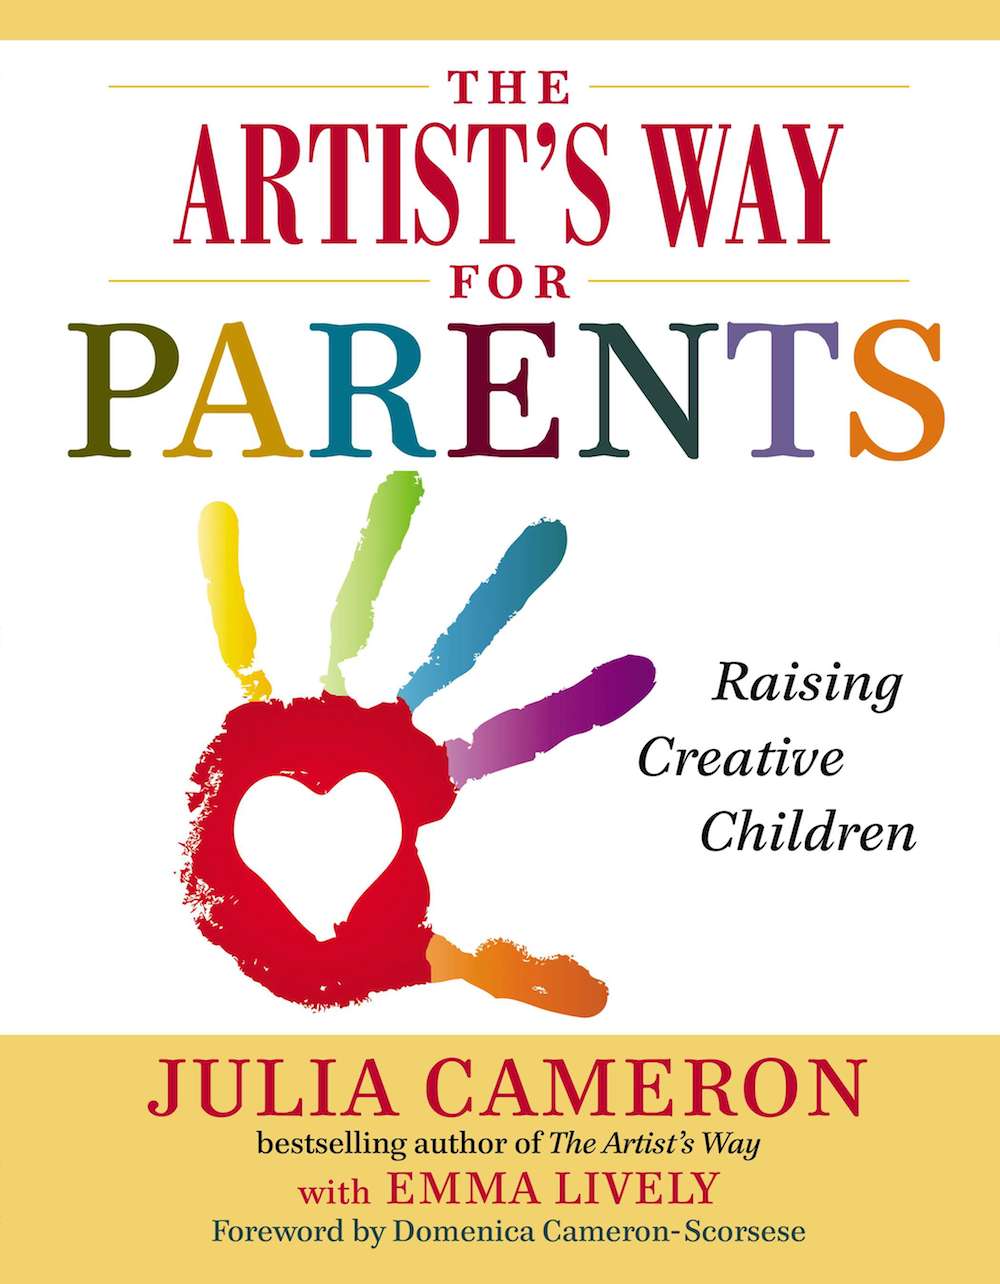 9780399168819_large_The_Artist's_Way_for_Parents.jpg